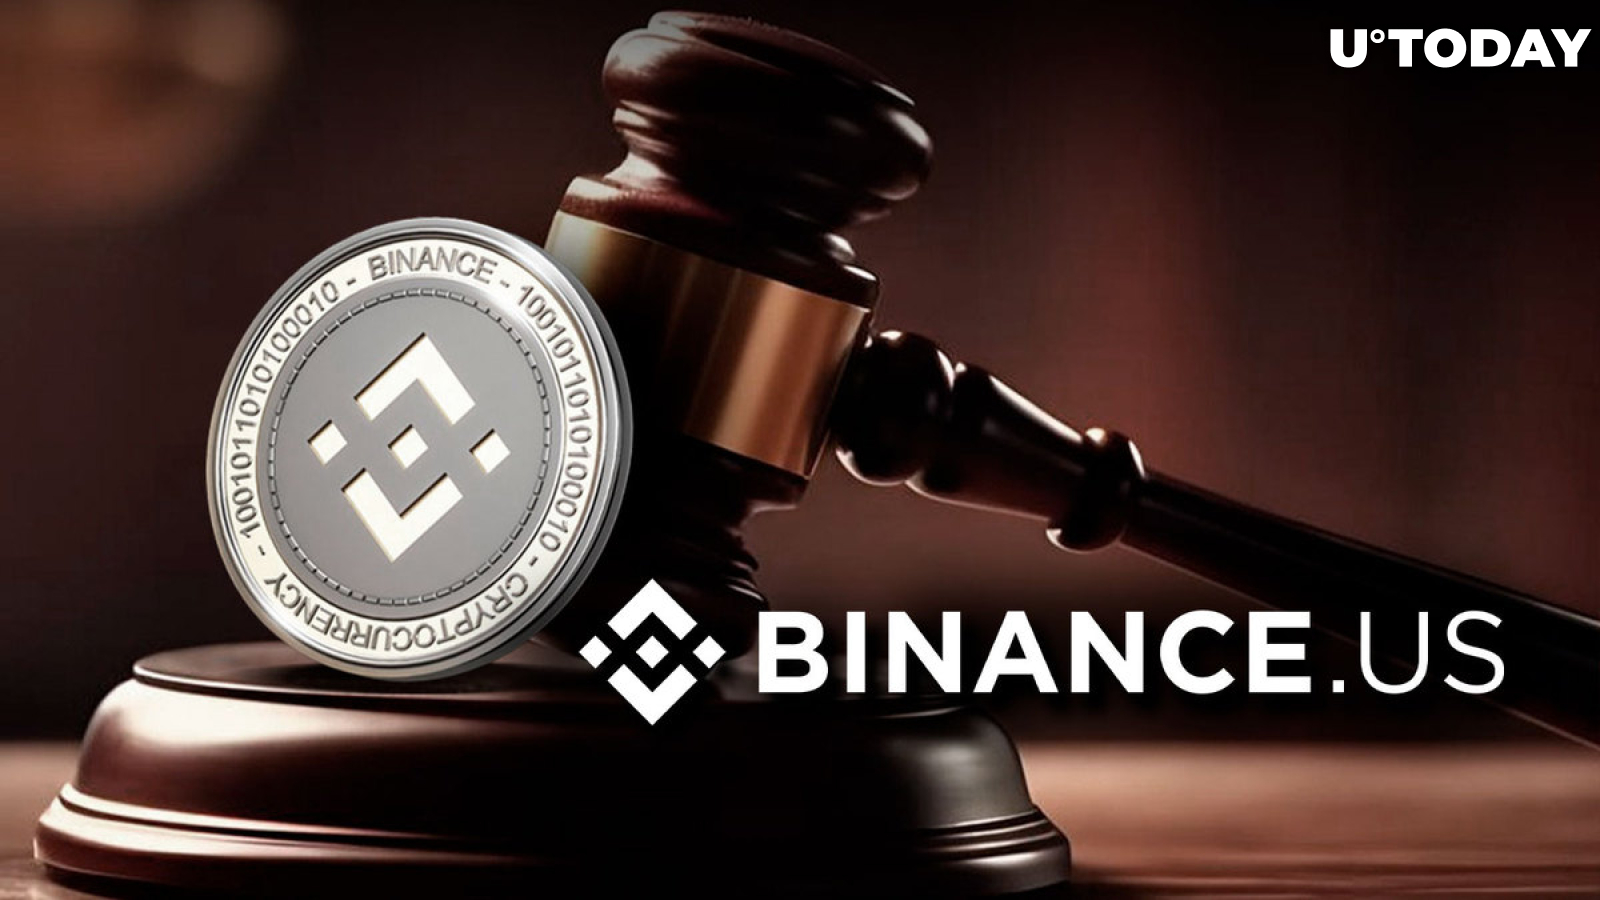 SEC Takes Another Blow in Lawsuit Against Binance